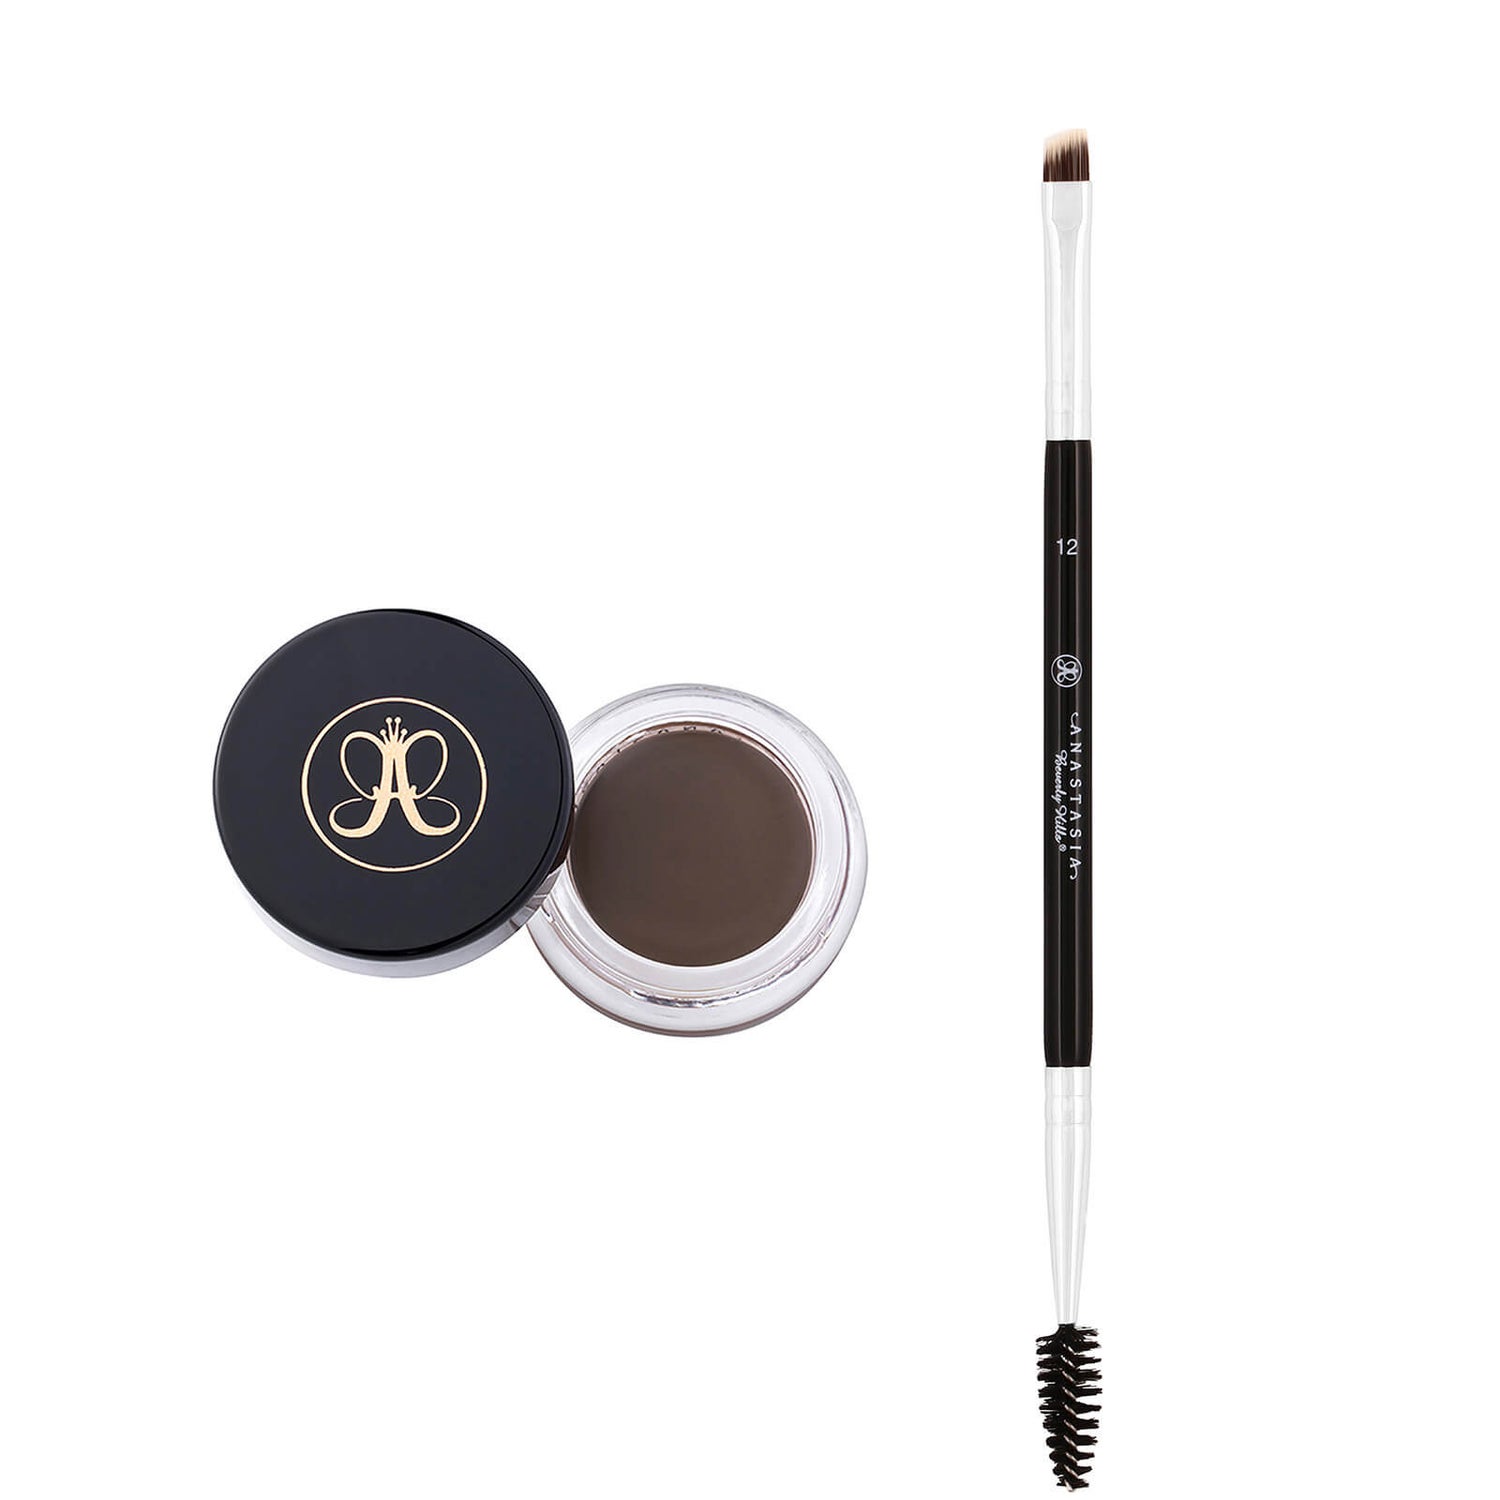 Anastasia Beverly Hills Dipbrow Pomade and Brush 12 Duo (Worth £37.00)